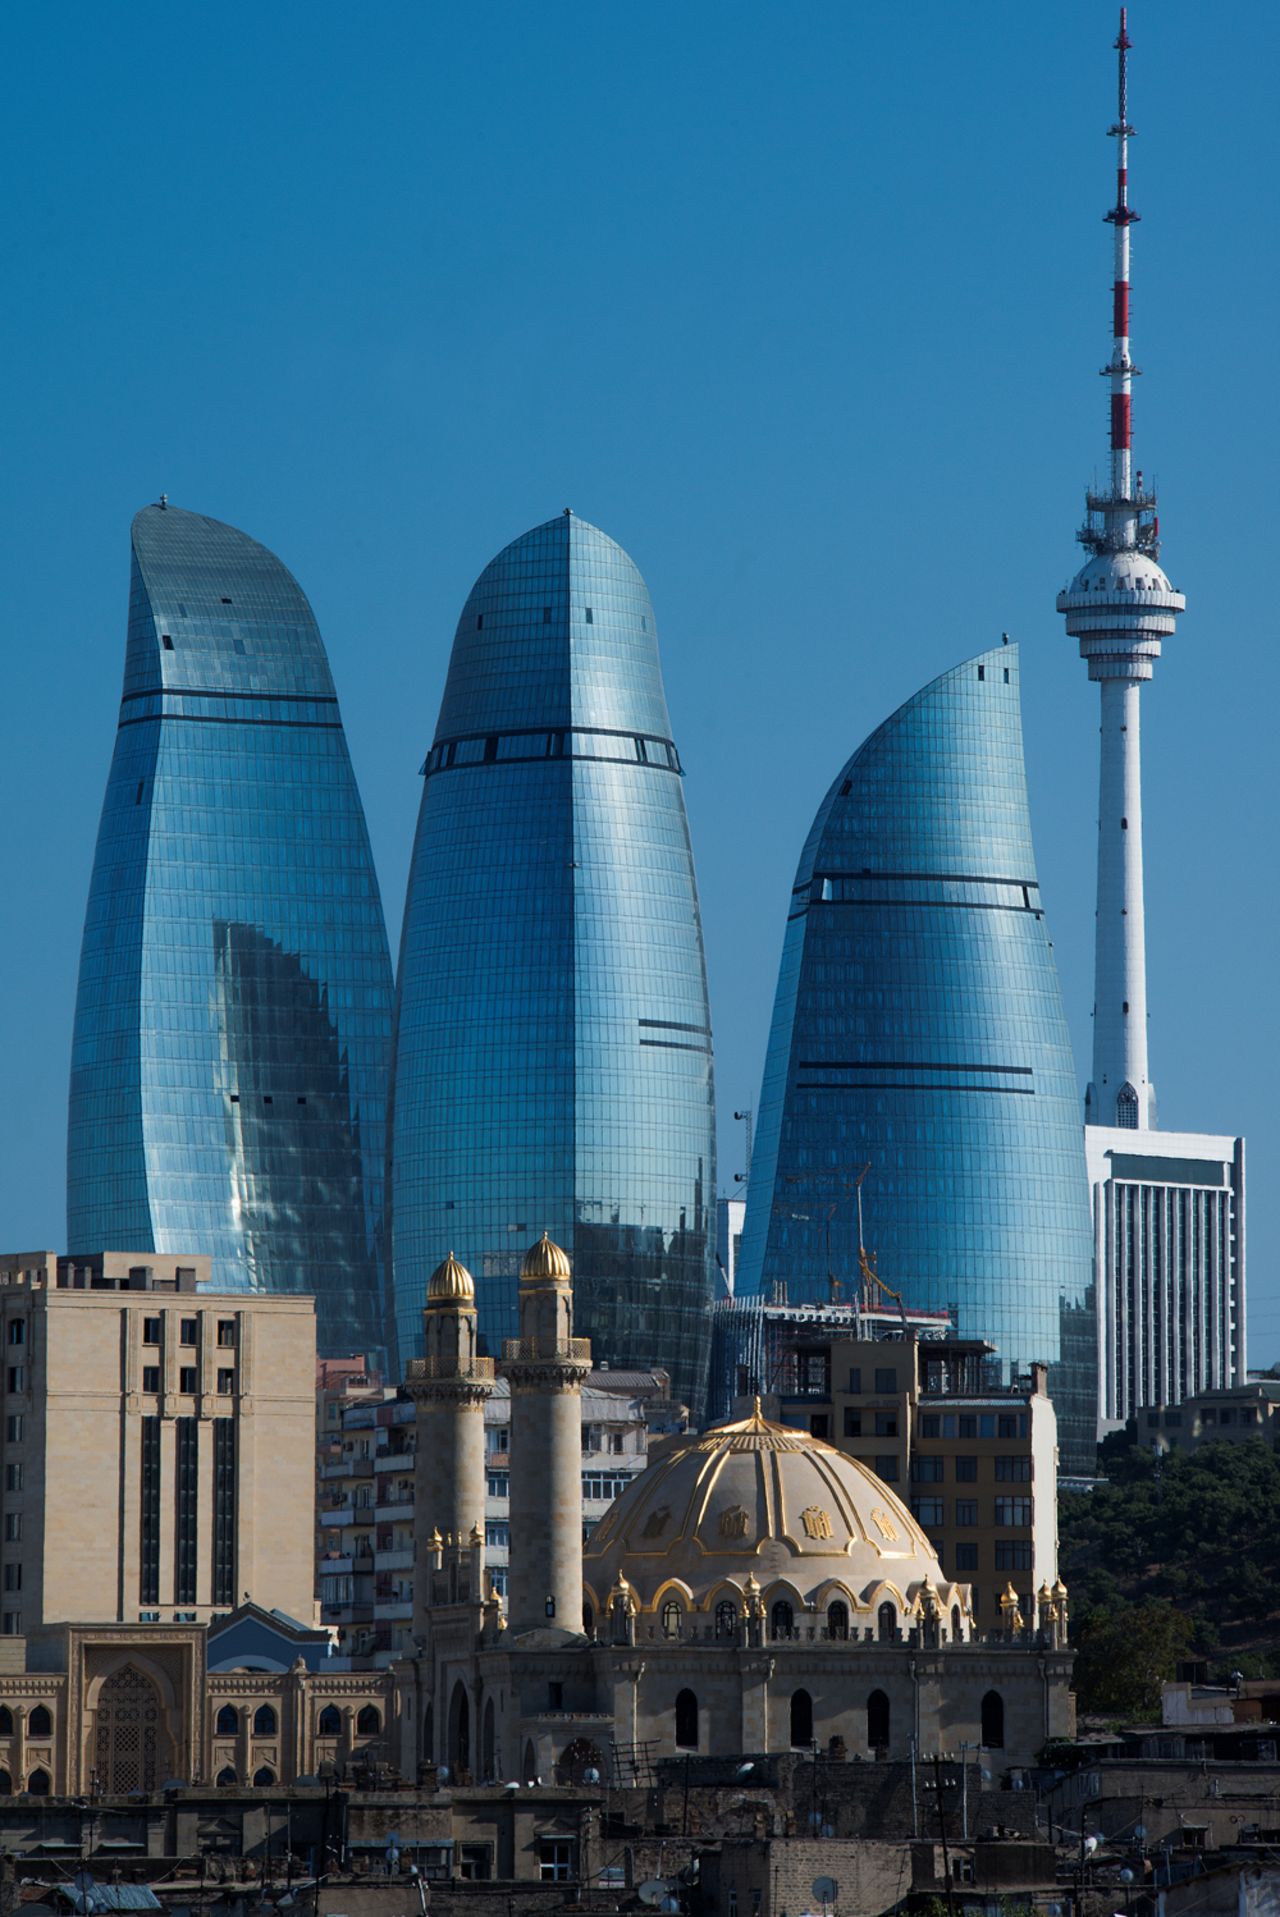 The new Flame Towers in Baku, Azerbaijan, designed by HOK International, were instantly popular, but posed several challenges to their makers.